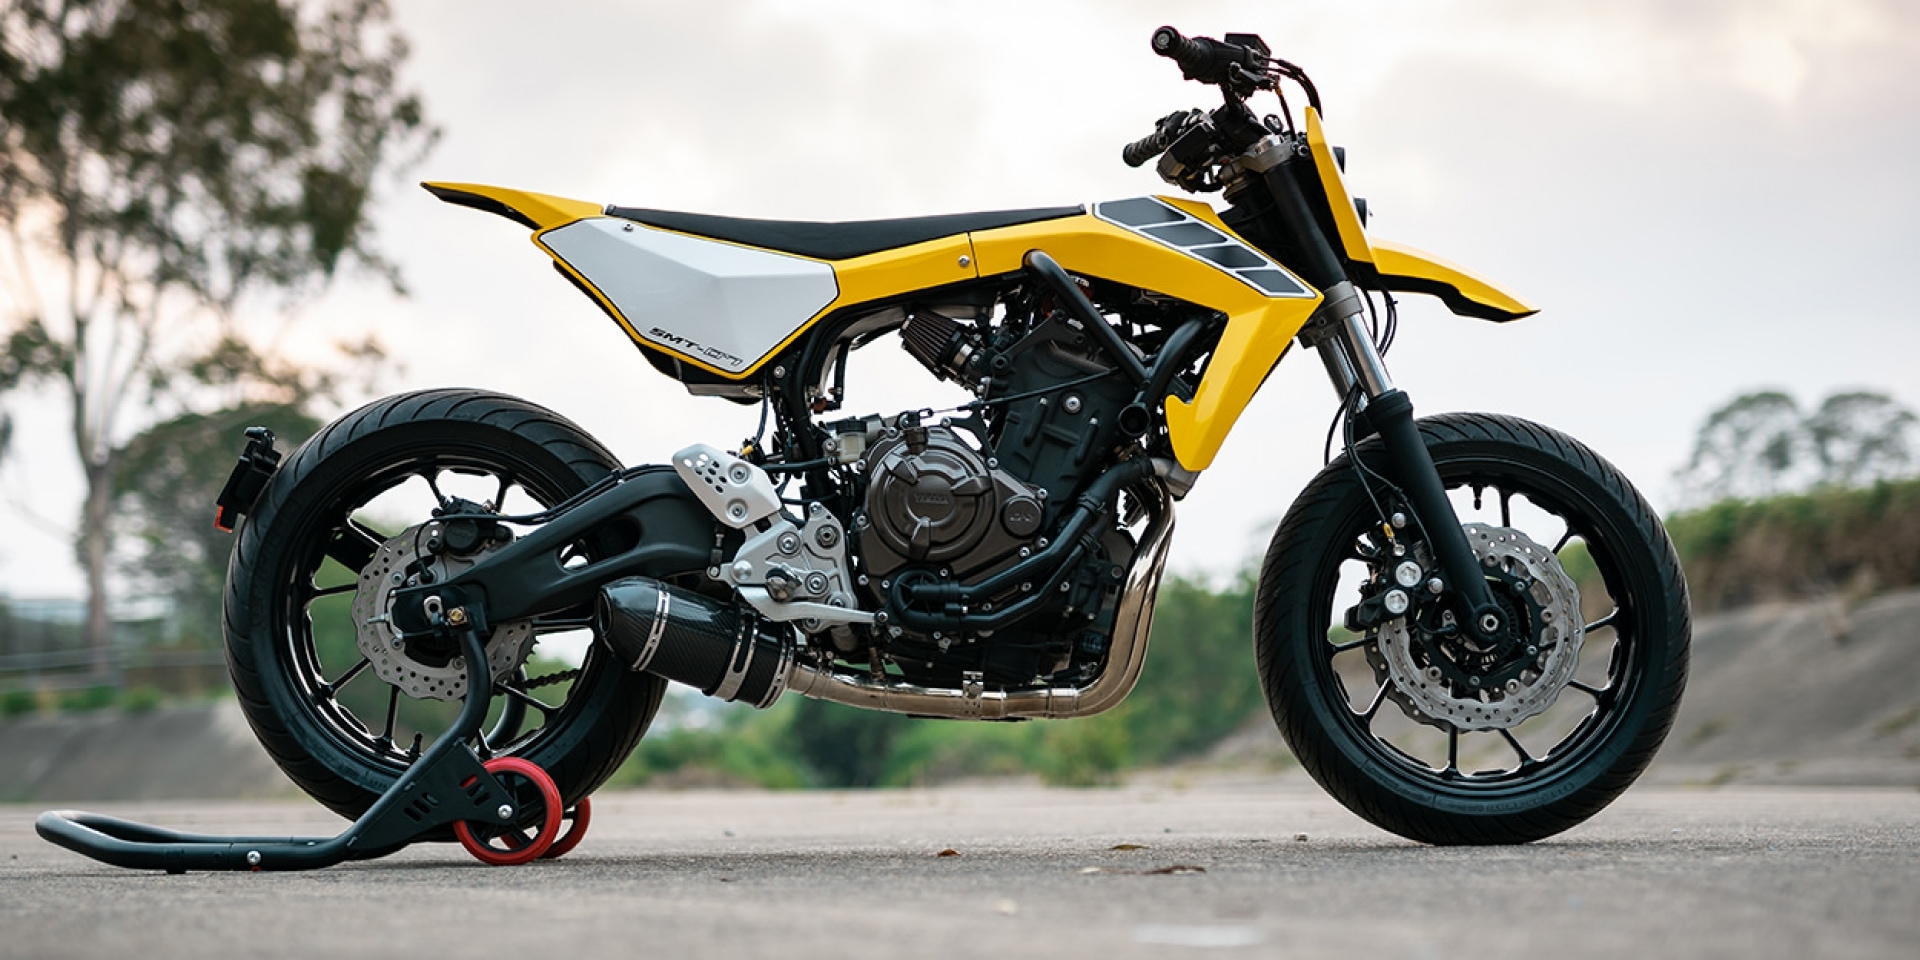 MT兄弟滑起來！YAMAHA MT-07 SUPERMOTO by Andrew Stagg